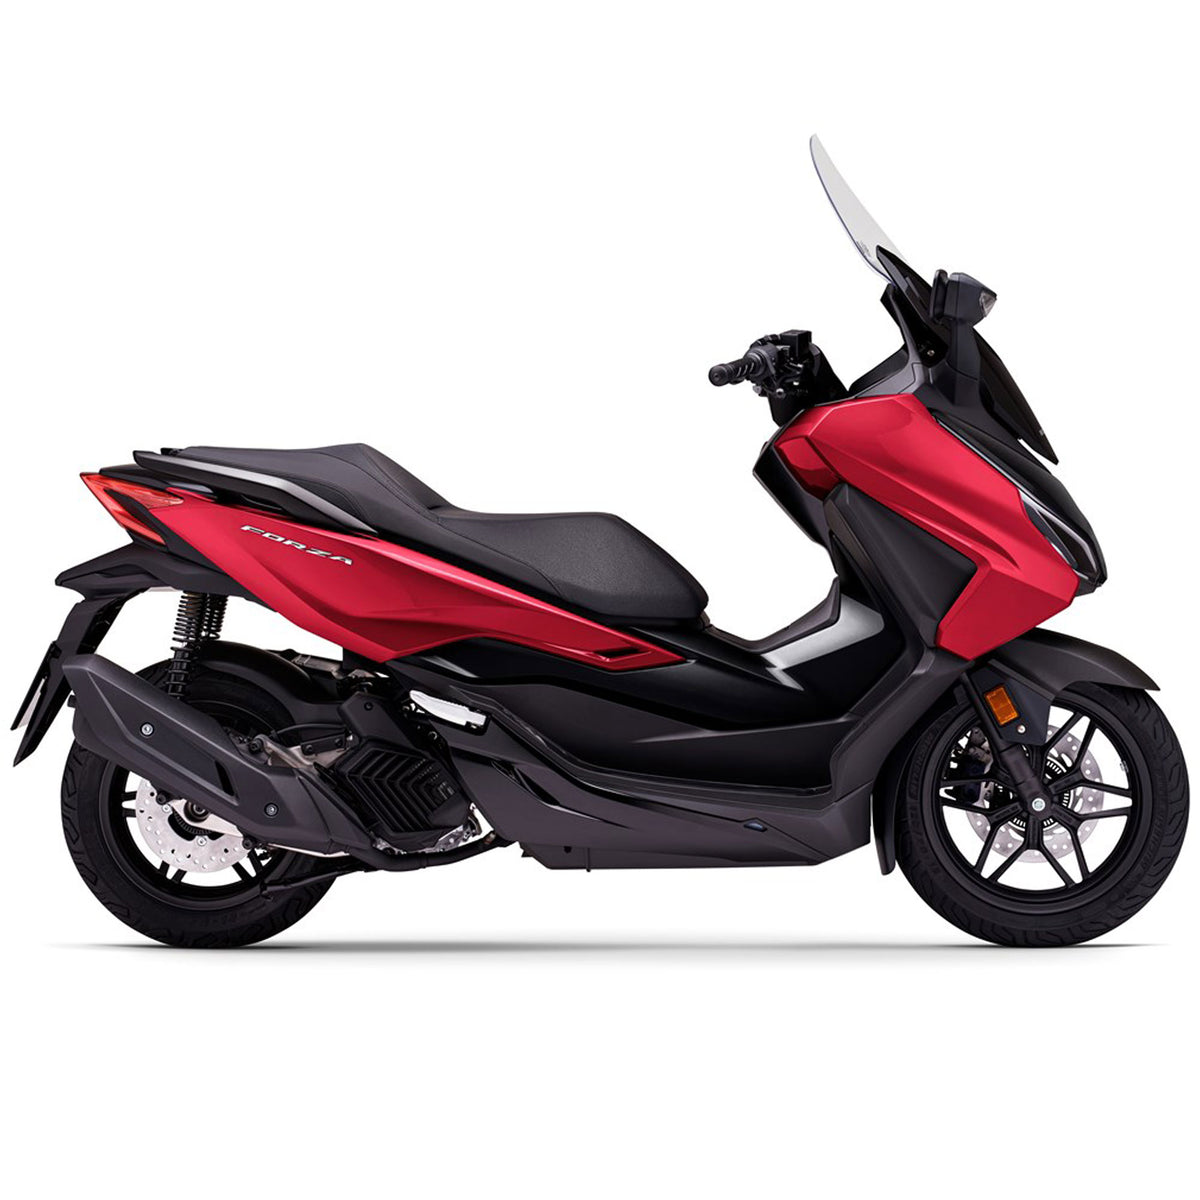 Scooters for Sale Bournemouth | Honda of Bournemouth | Forza 125